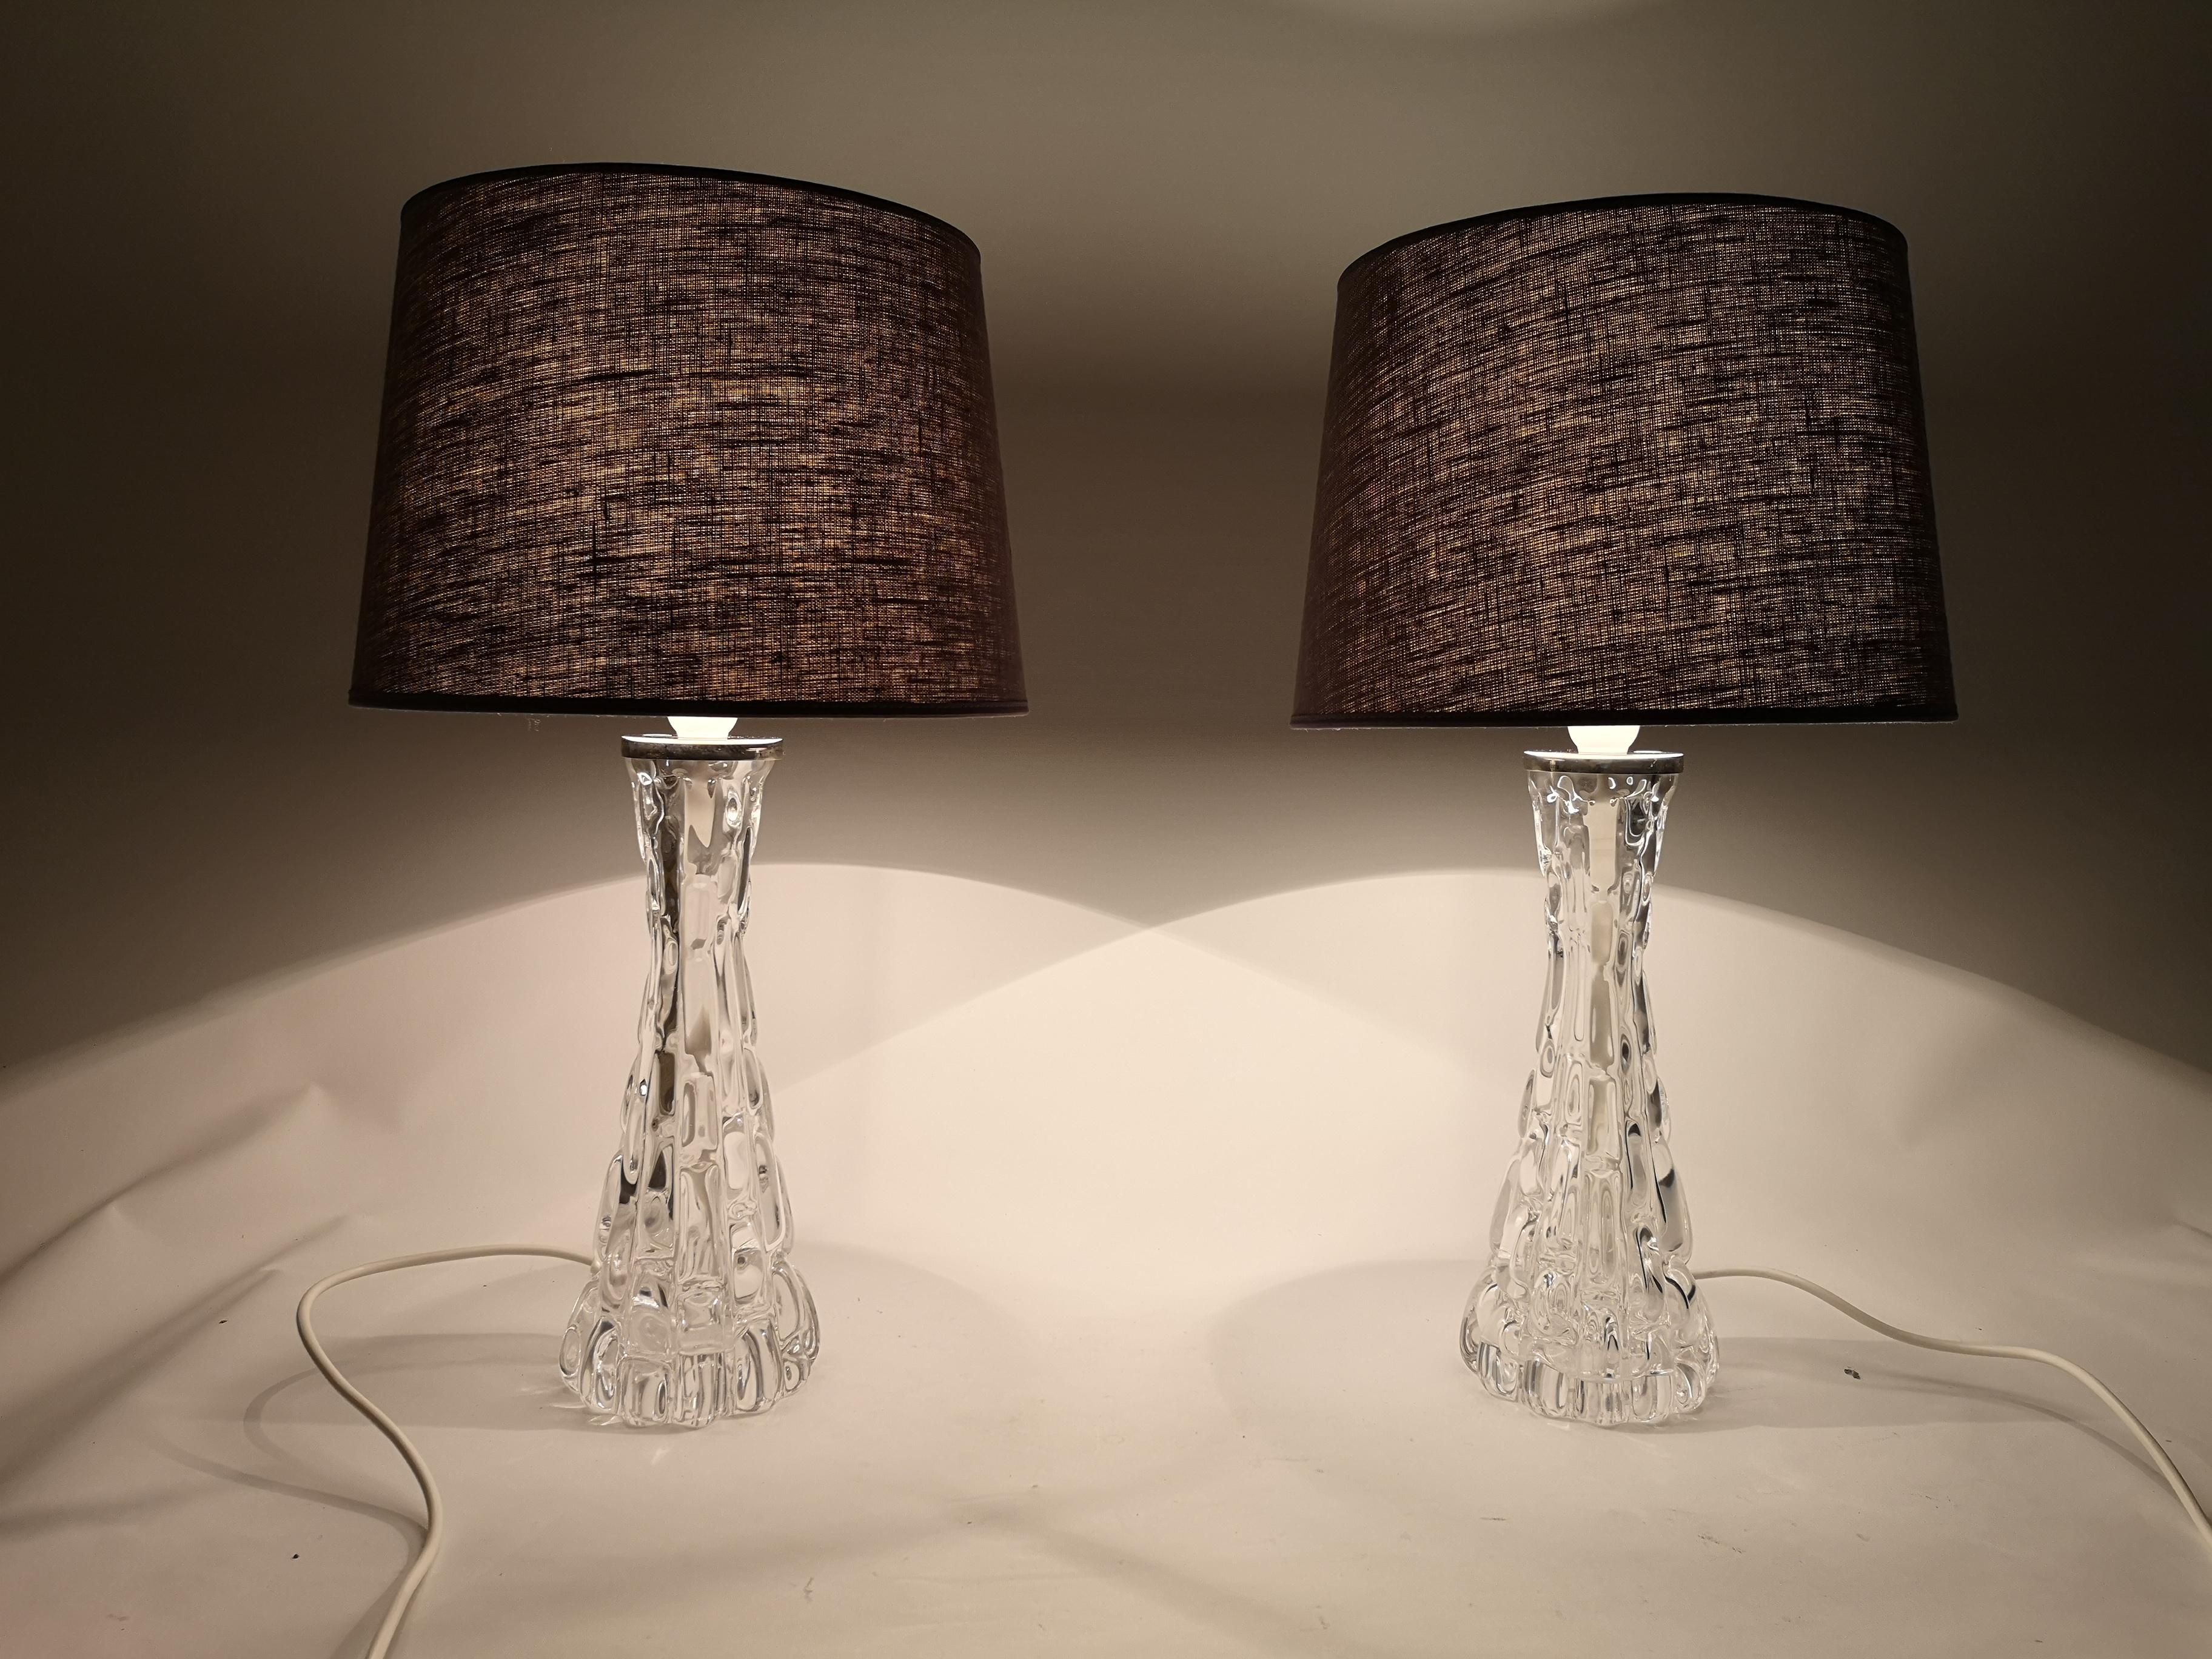 Exceptional pair of heavy hourglass form crystal lamps with polished nickel fittings. The lamps were made in Sweden at Orrefors glasbruk.
The designer Carl Fagerlund has created at glass that perfectly combines art and function. 

They are sold